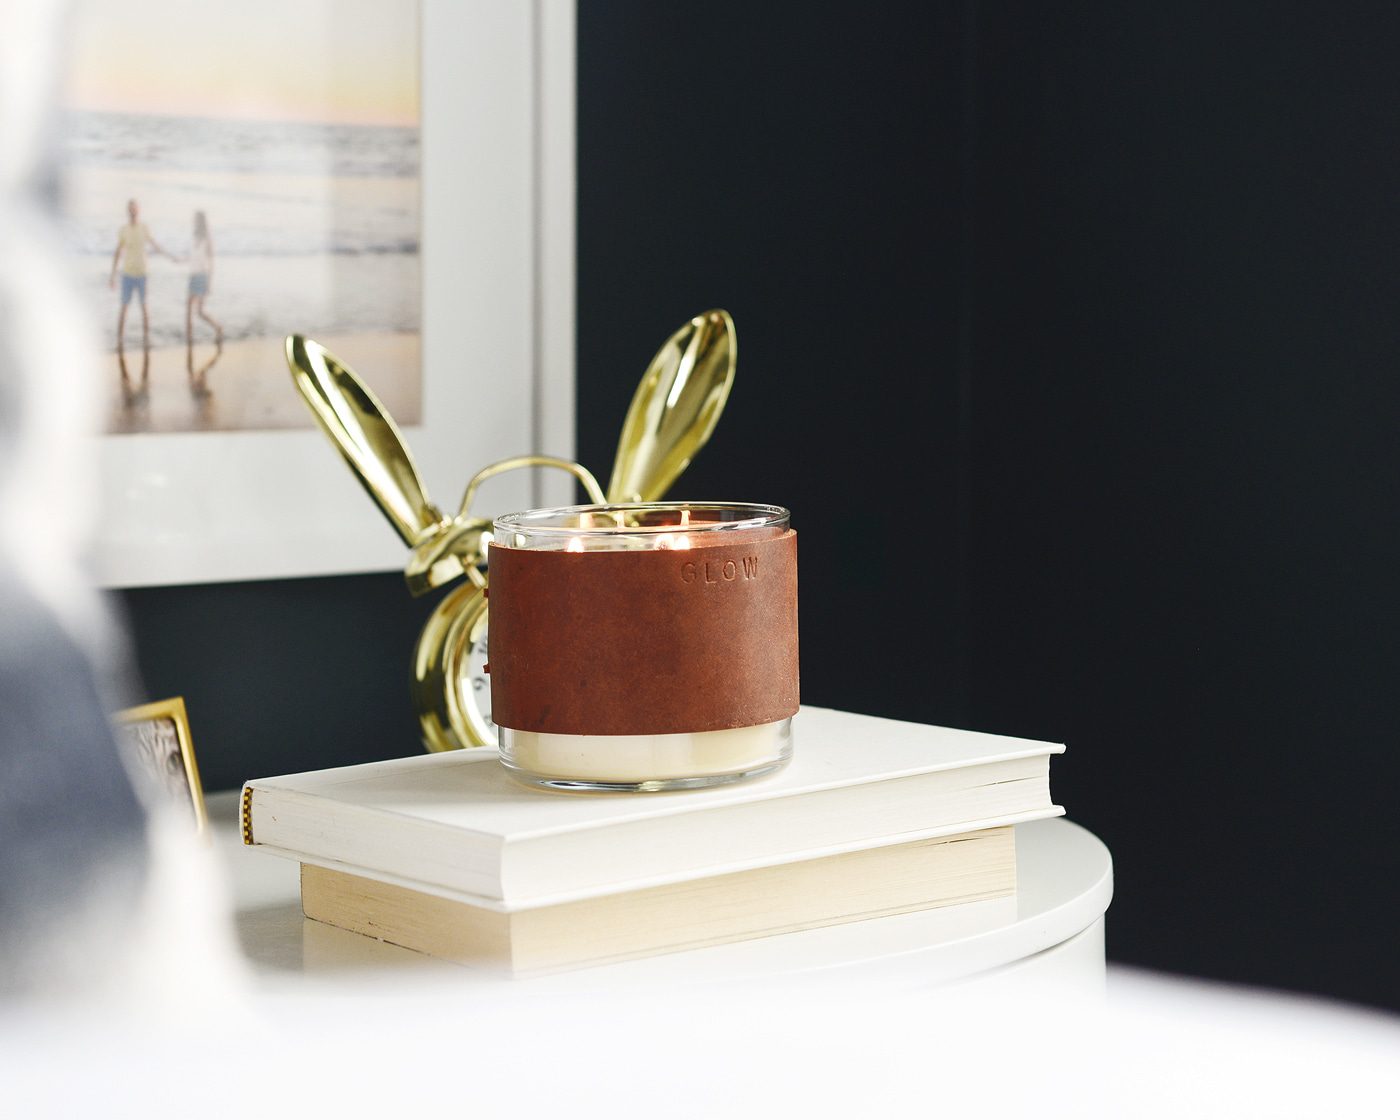 DIY leather candle cozy, leather candle wrap, rustic candle idea // via Yellow Brick Home